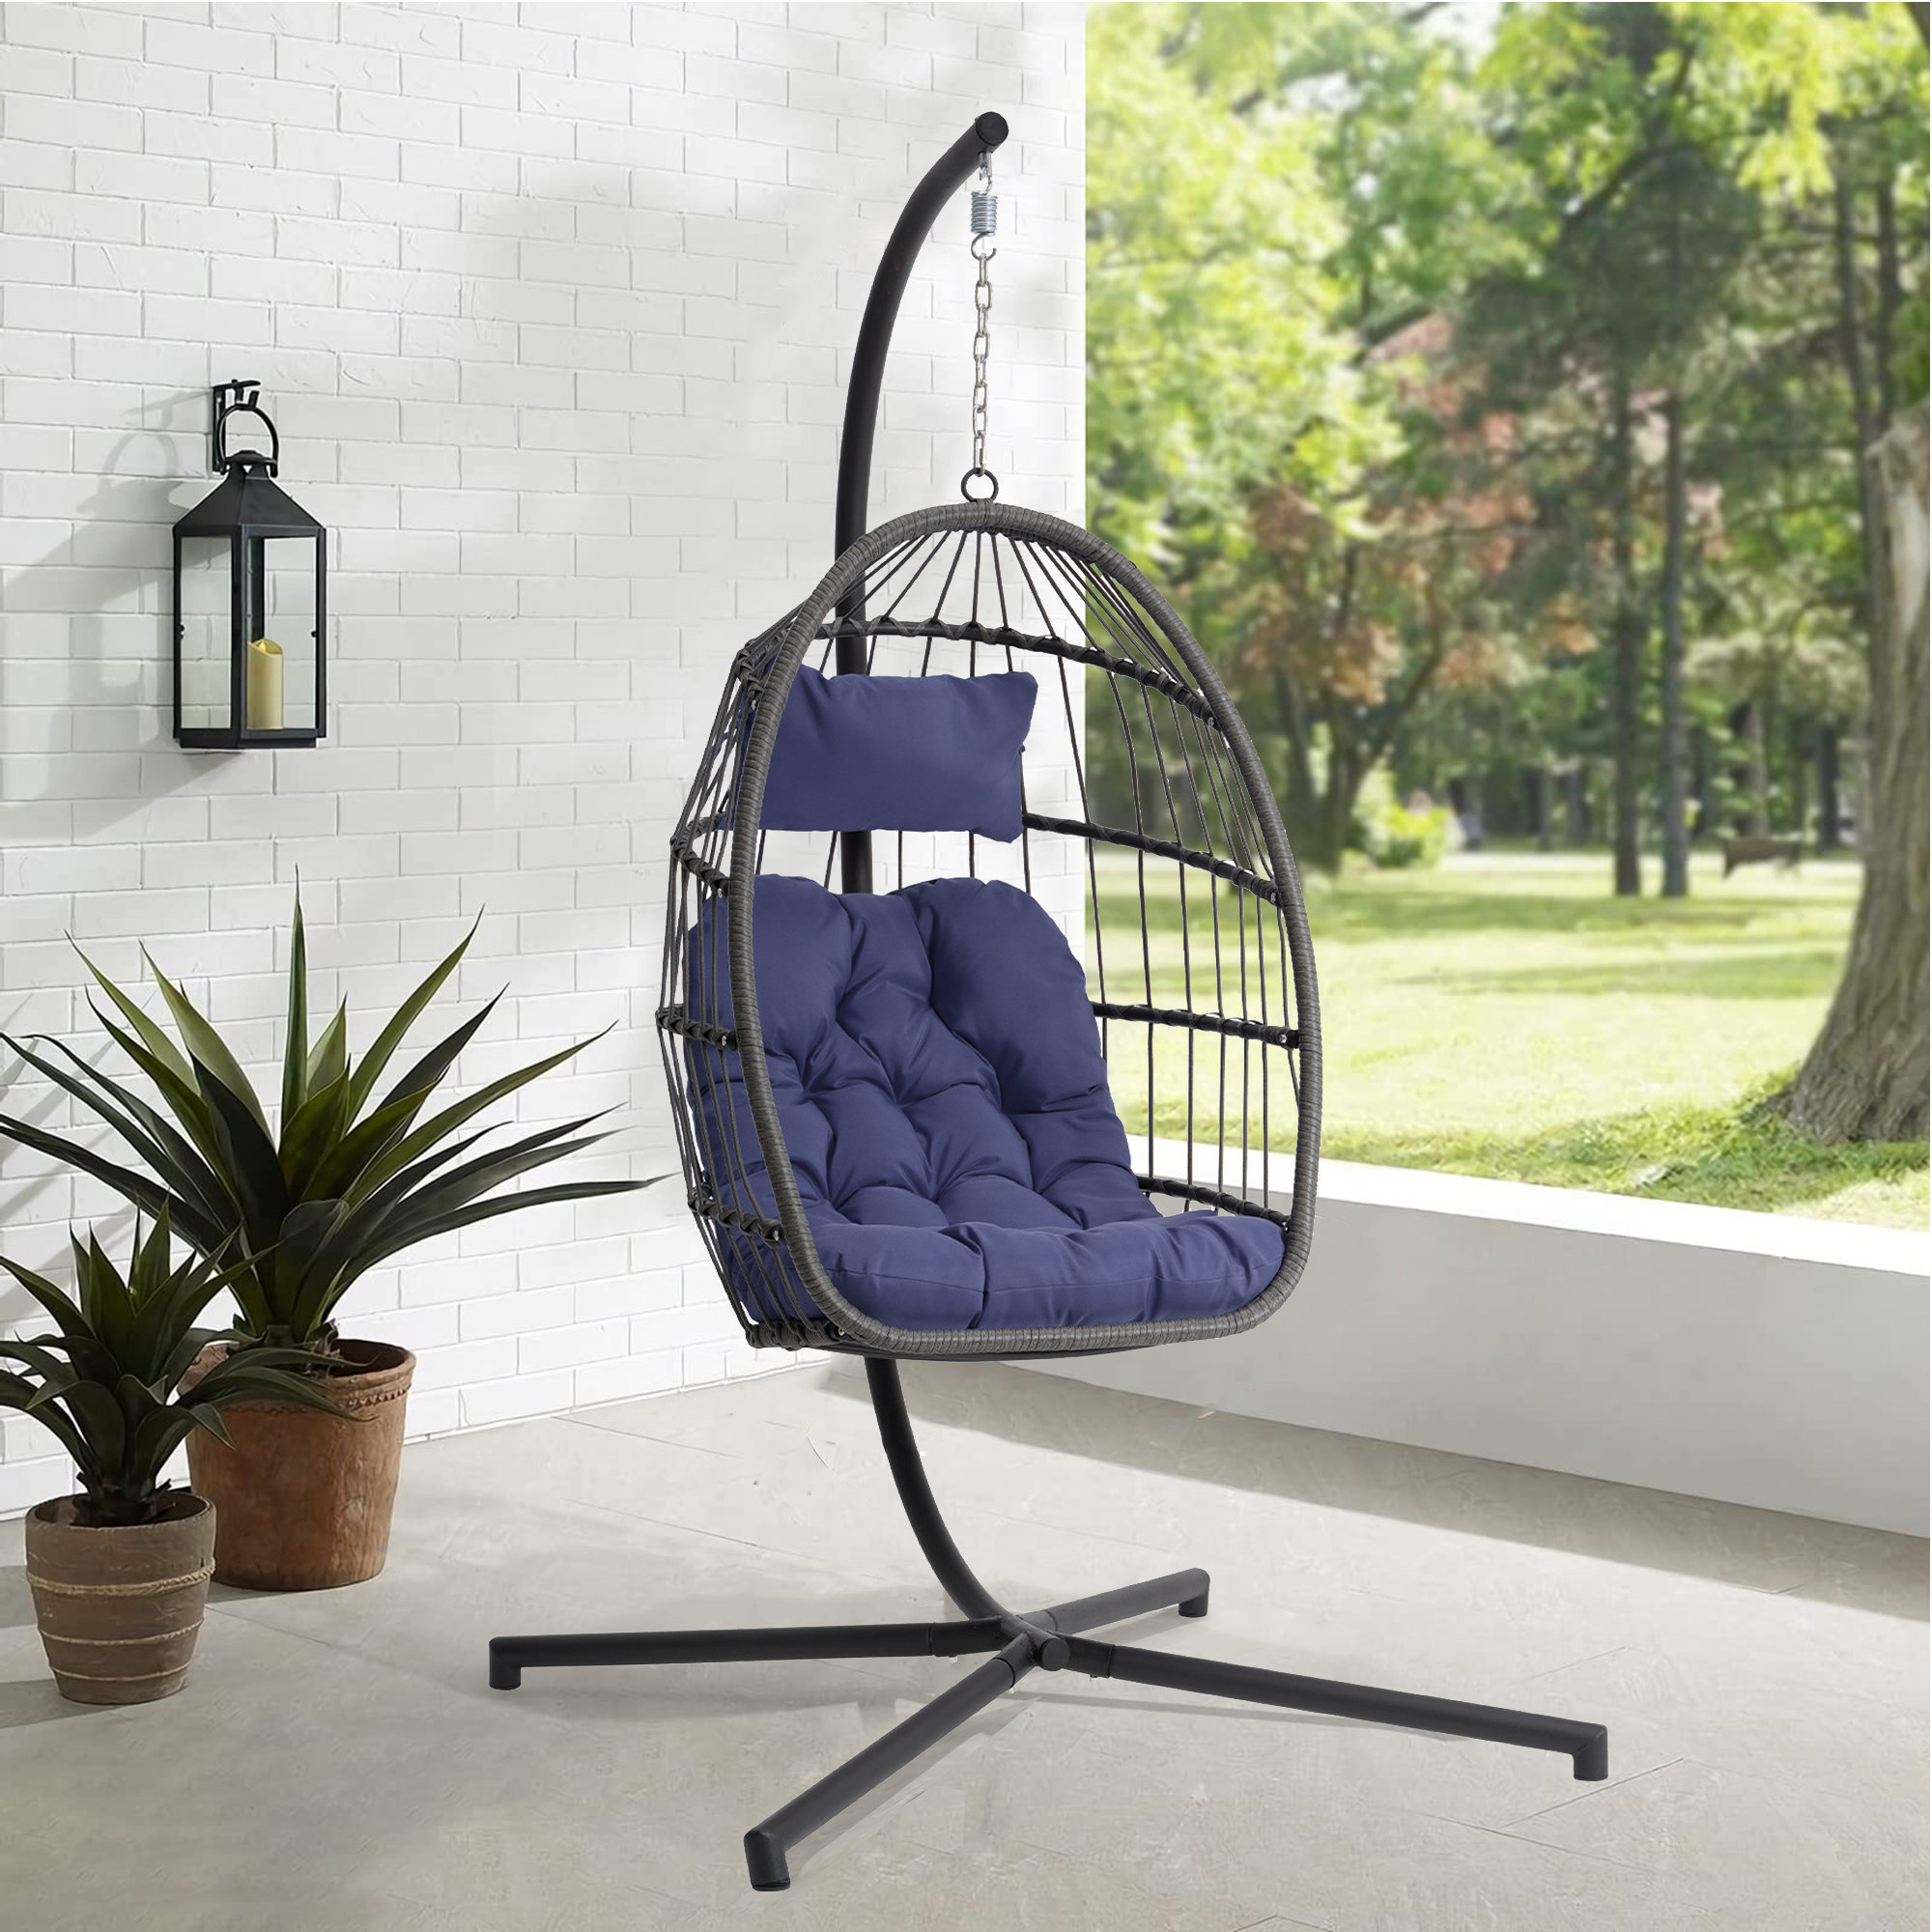 Cohdwell Hanging Egg Chair with Stand, Patio Wicker Hammock Swing Chair with Soft Seat Cushion Dakota Fields Cushion Color: Dark Blue